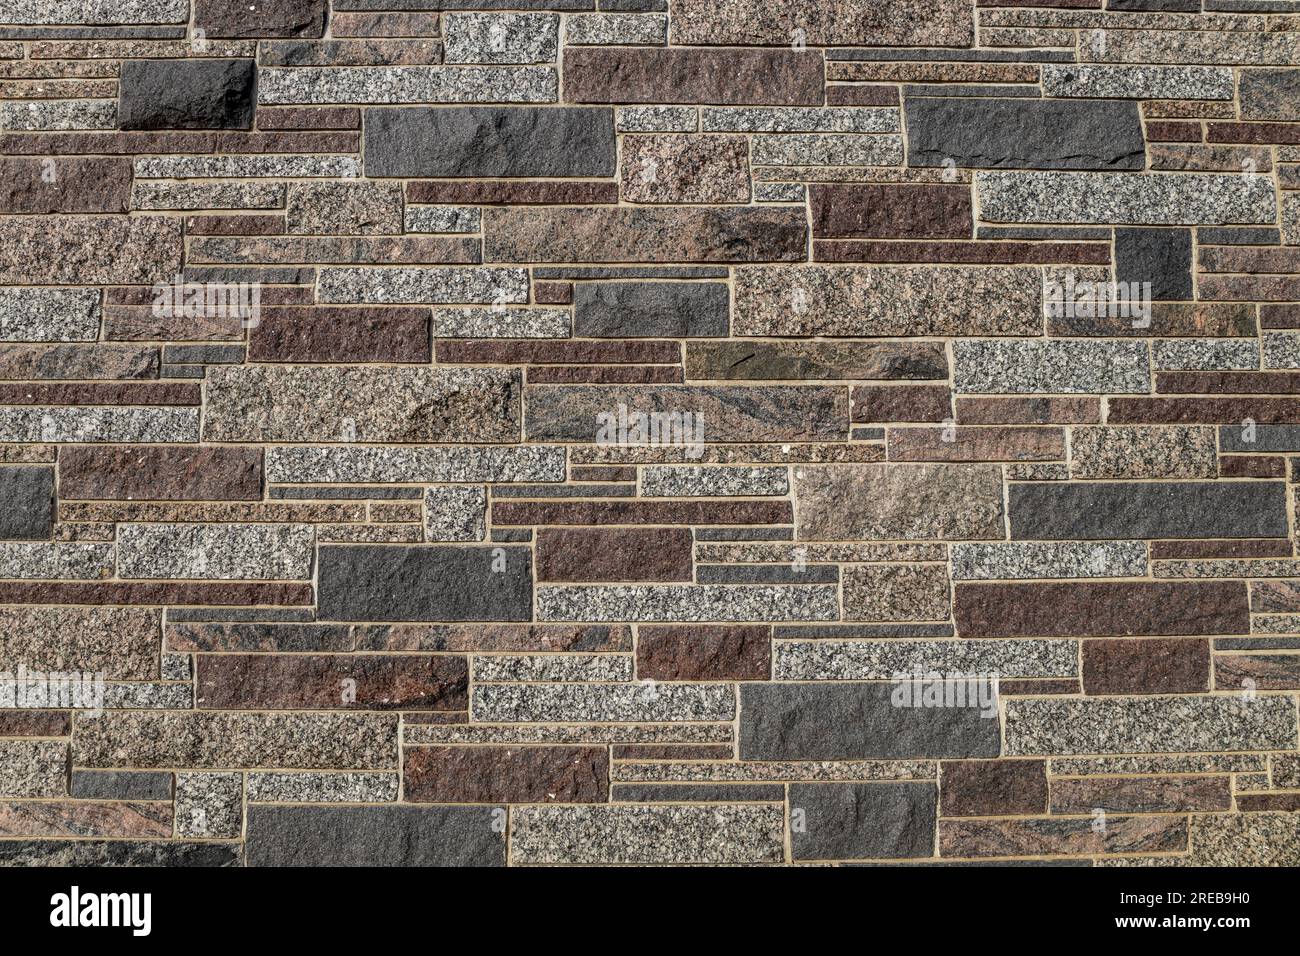 Full frame texture background of a modern granite stone wall in ashlar masonry style, in varying sizes and shades of white, brown, red and blue Stock Photo